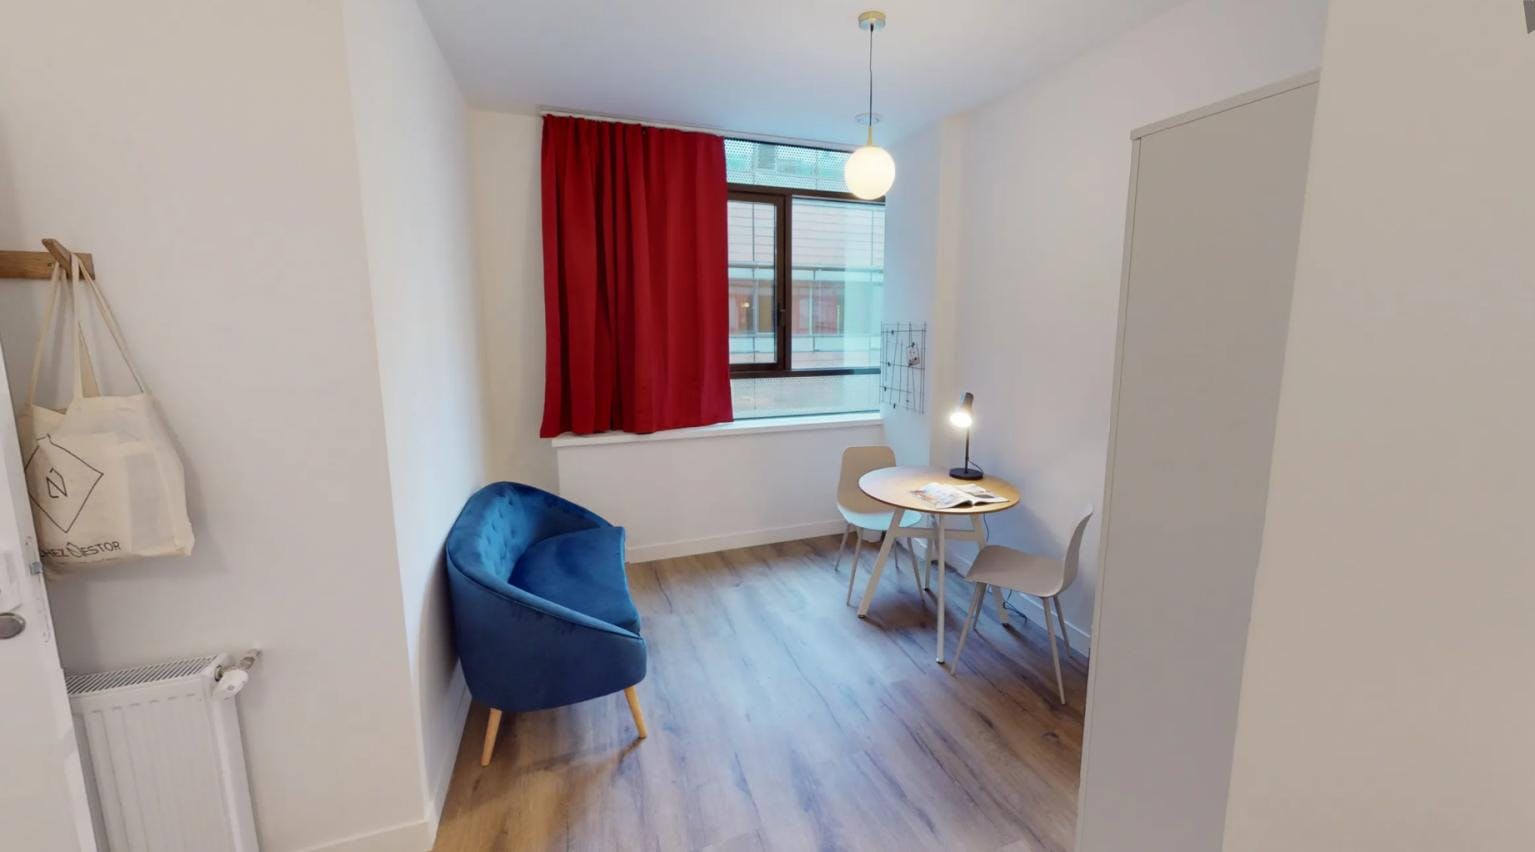 Inviting double ensuite in a 12-bedroom apartment not far from Parc des Bruyères